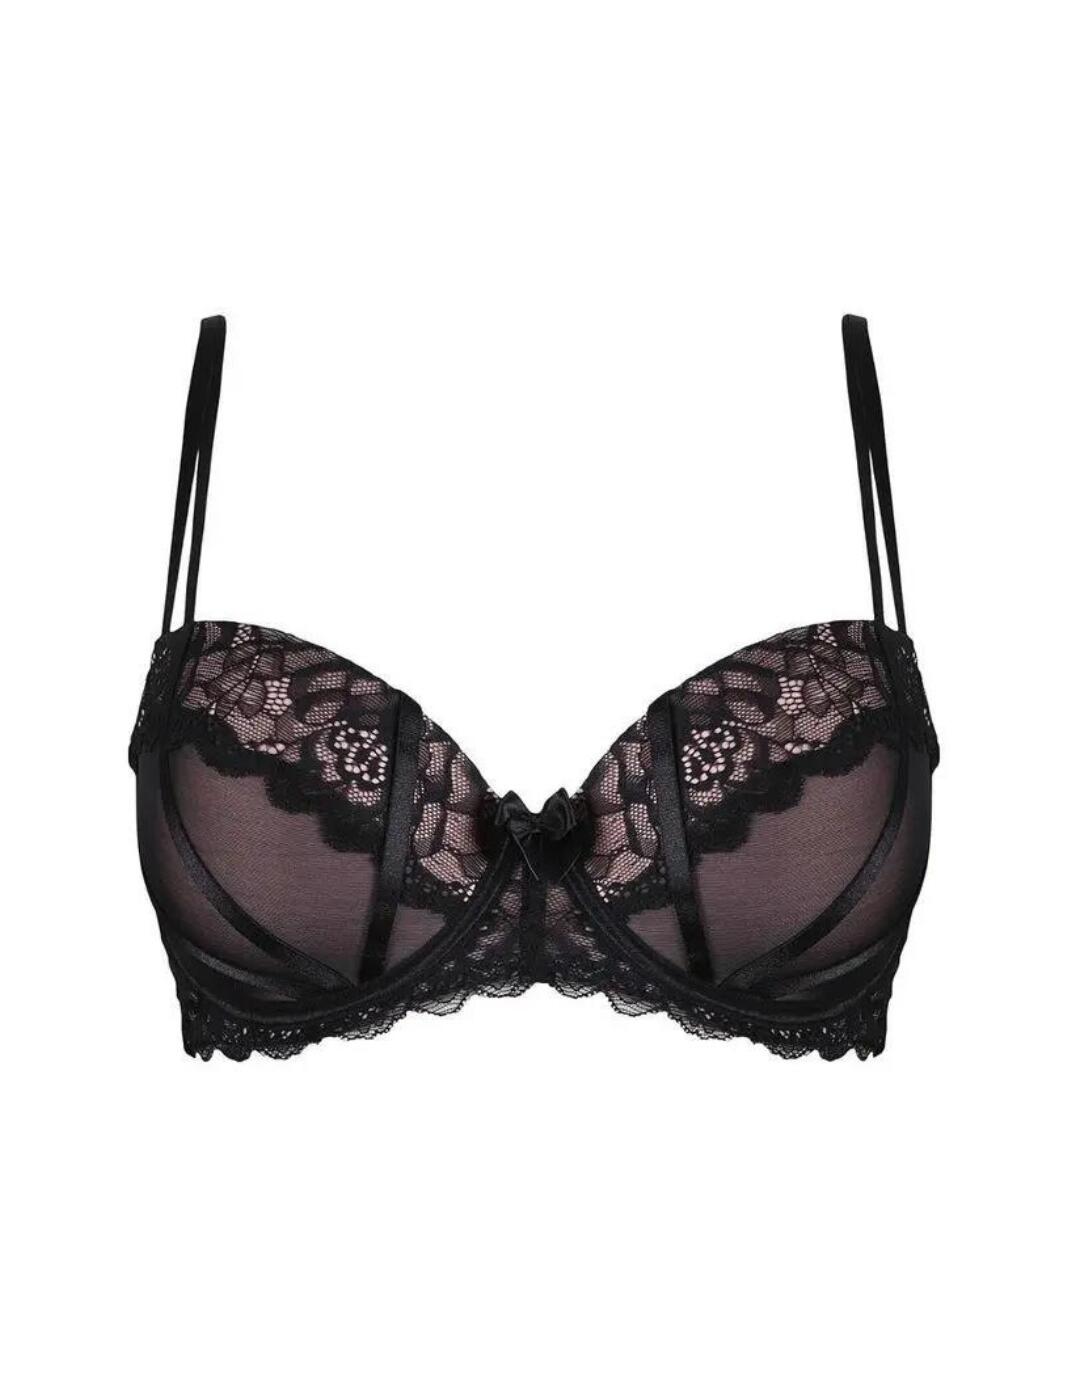 Pour Moi Confession Padded Bra Black/Pink